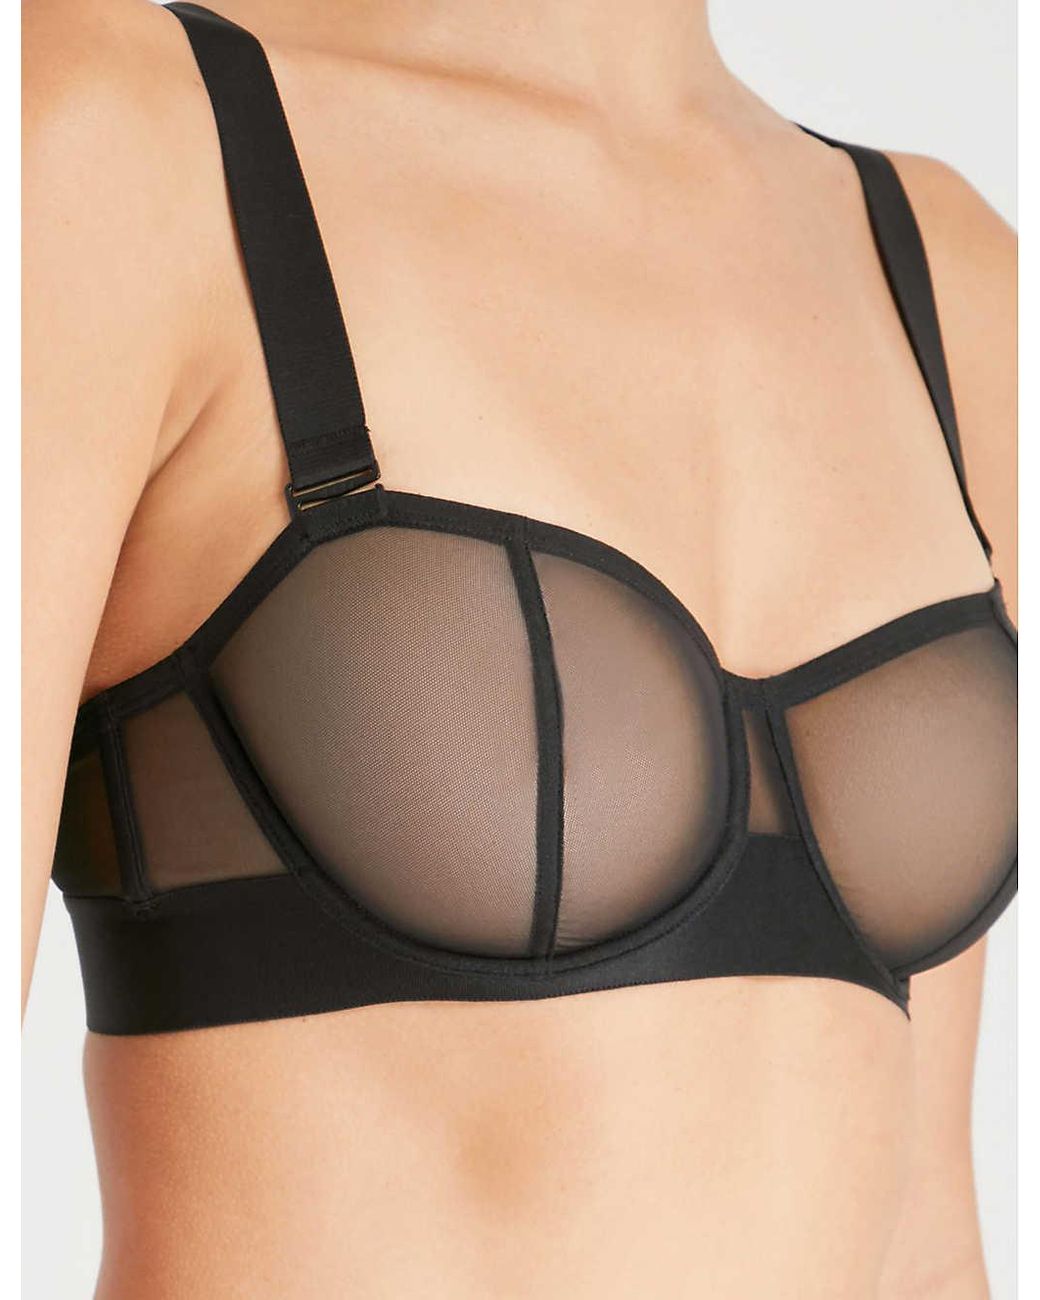 DKNY Women's Sheers Convertible Strapless Bra, Cashmere at